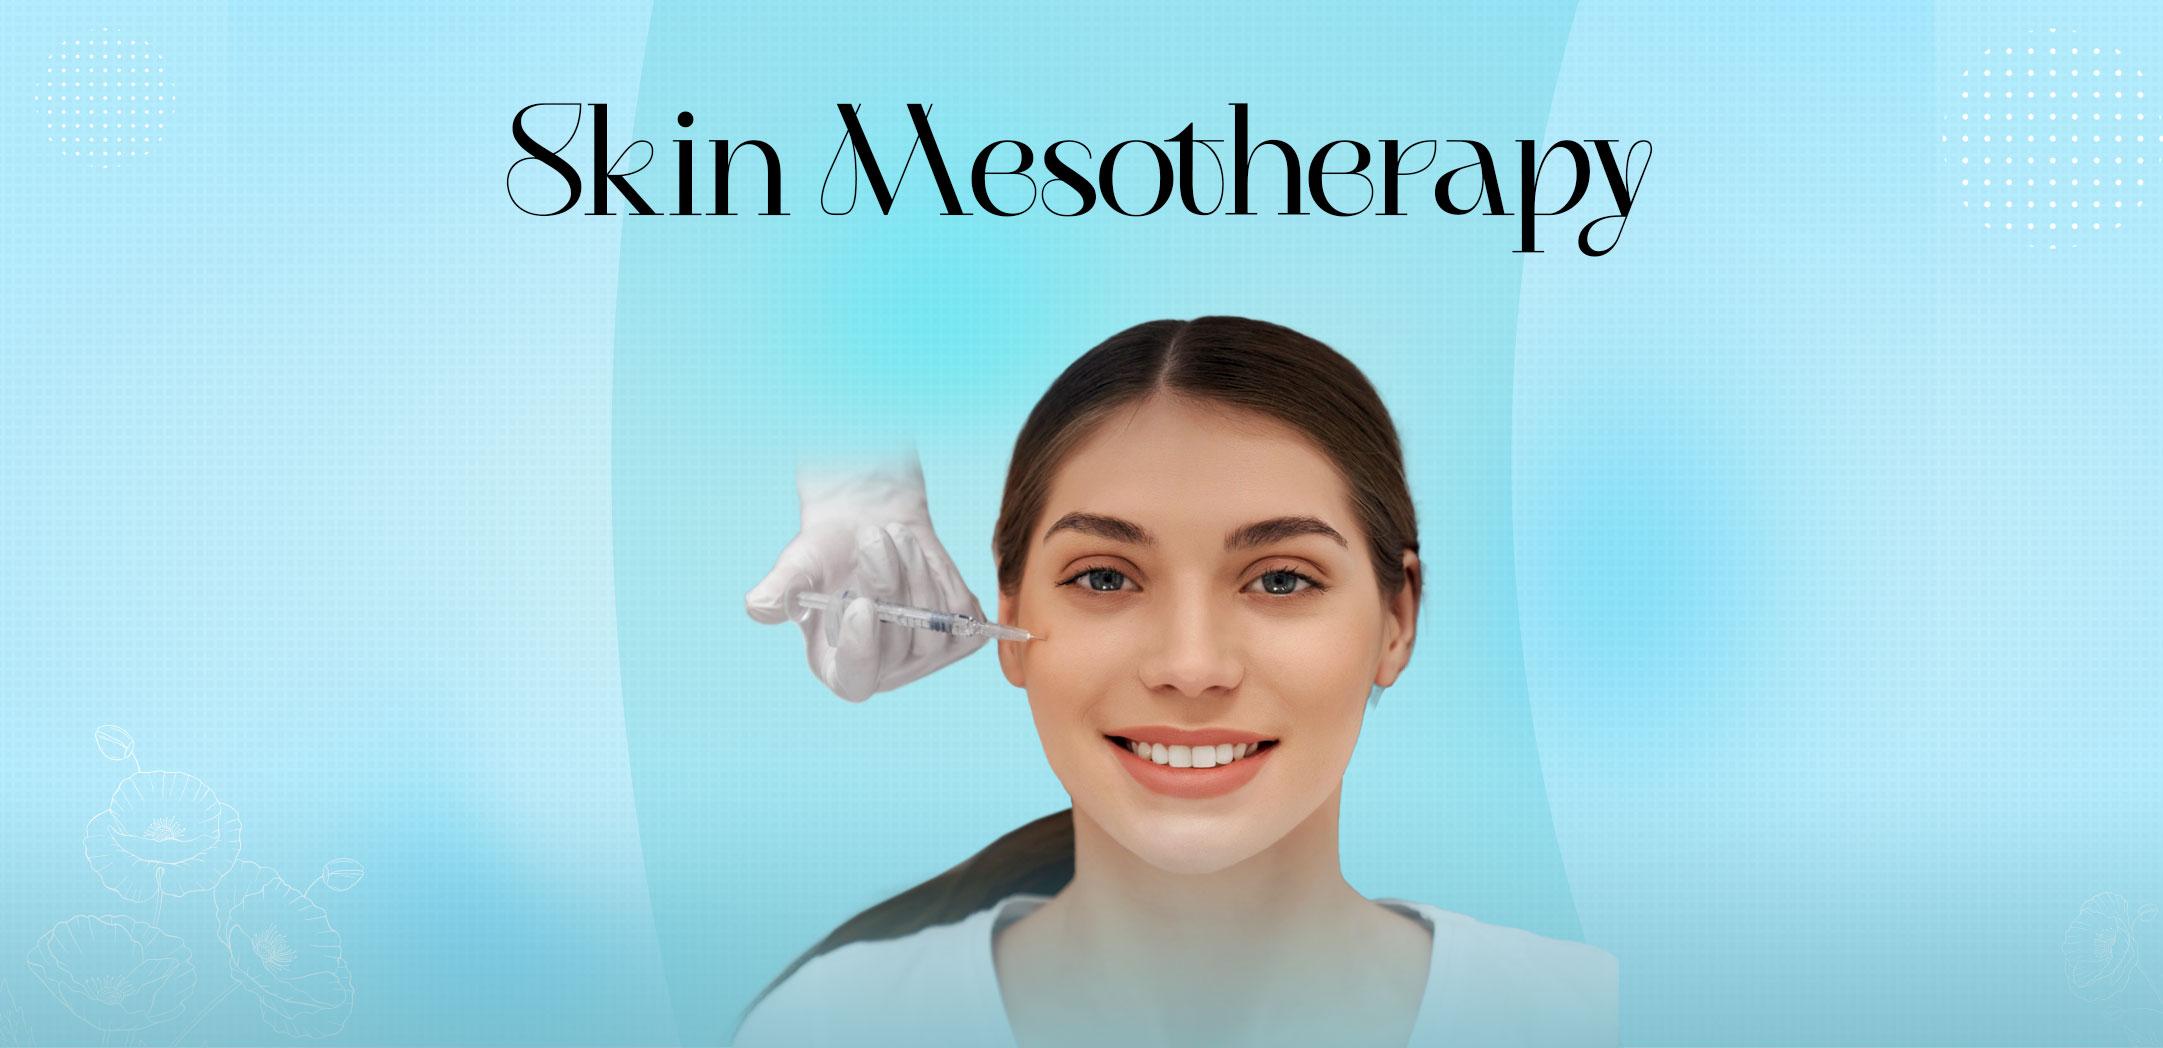 Skin Mesotherapy